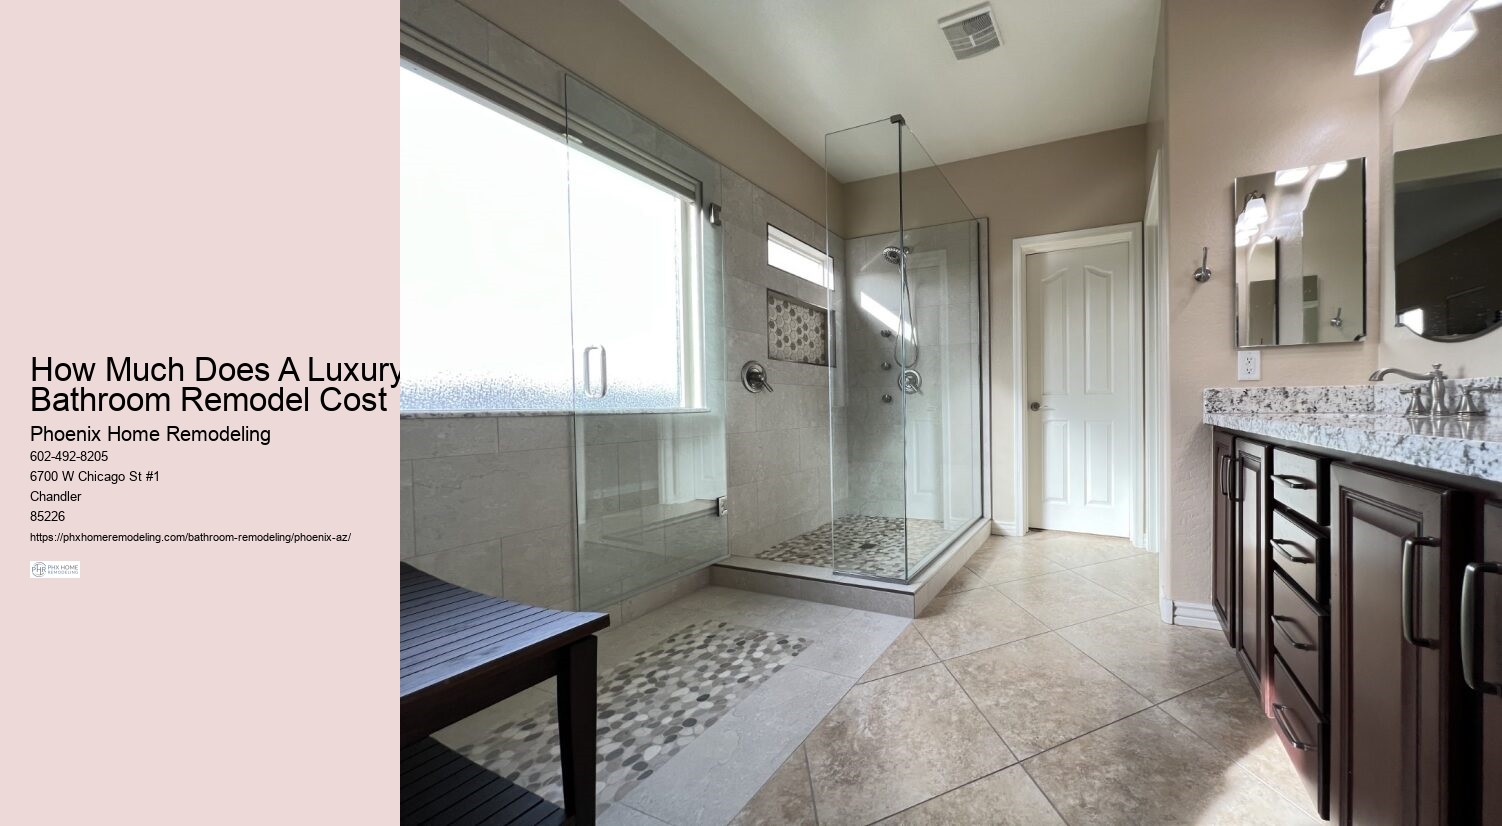 How Much Does A Luxury Bathroom Remodel Cost